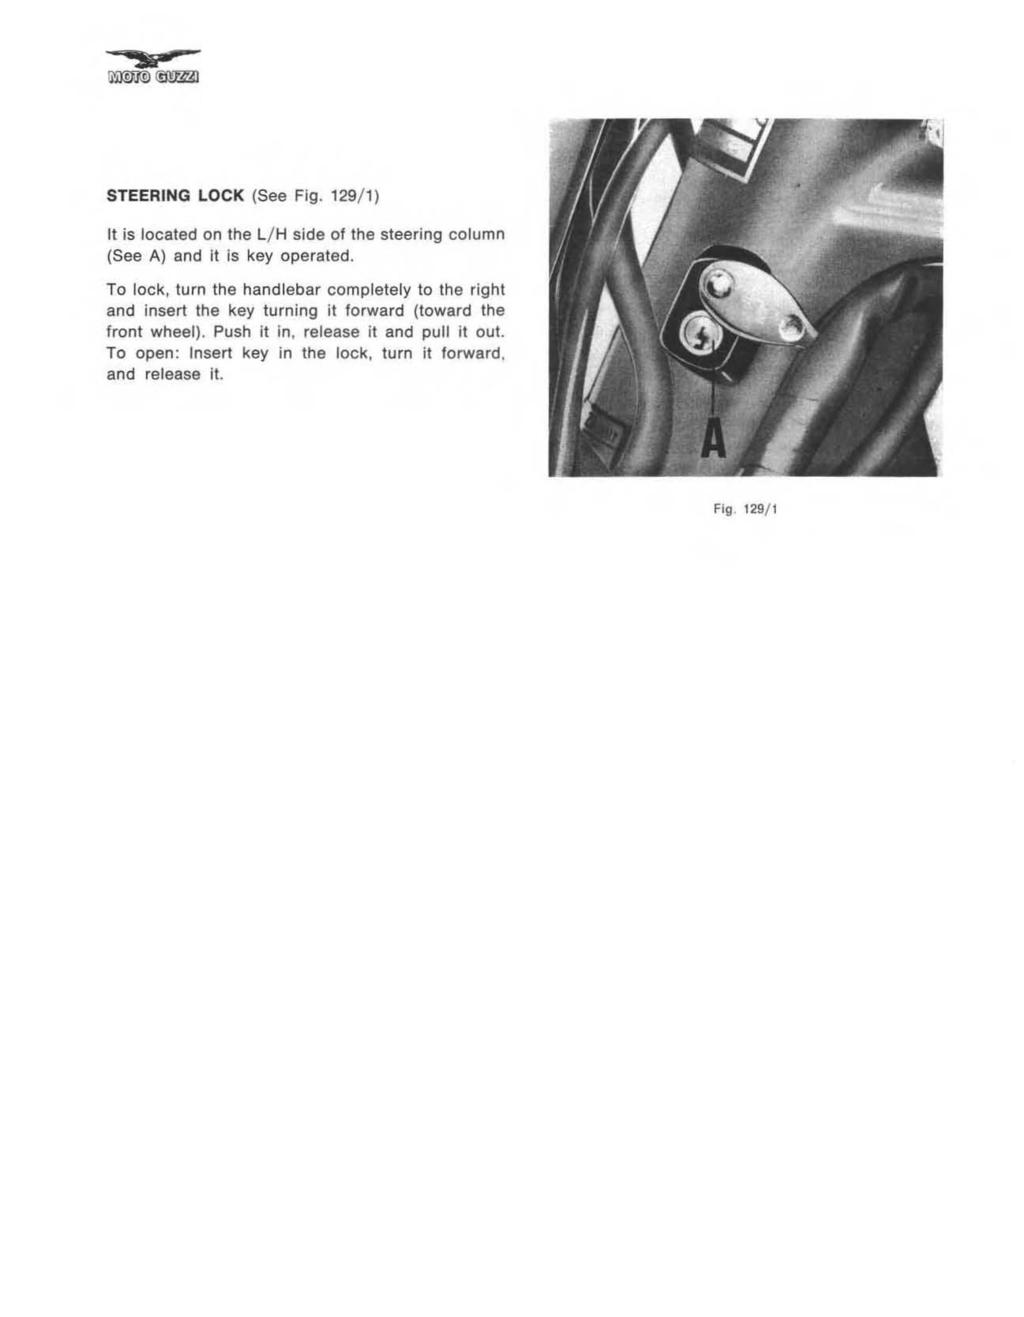 STEERING LOCK (See Fig. 129/ 1) It is located on the L/ H side of the steering column (See A) and it is key operated.